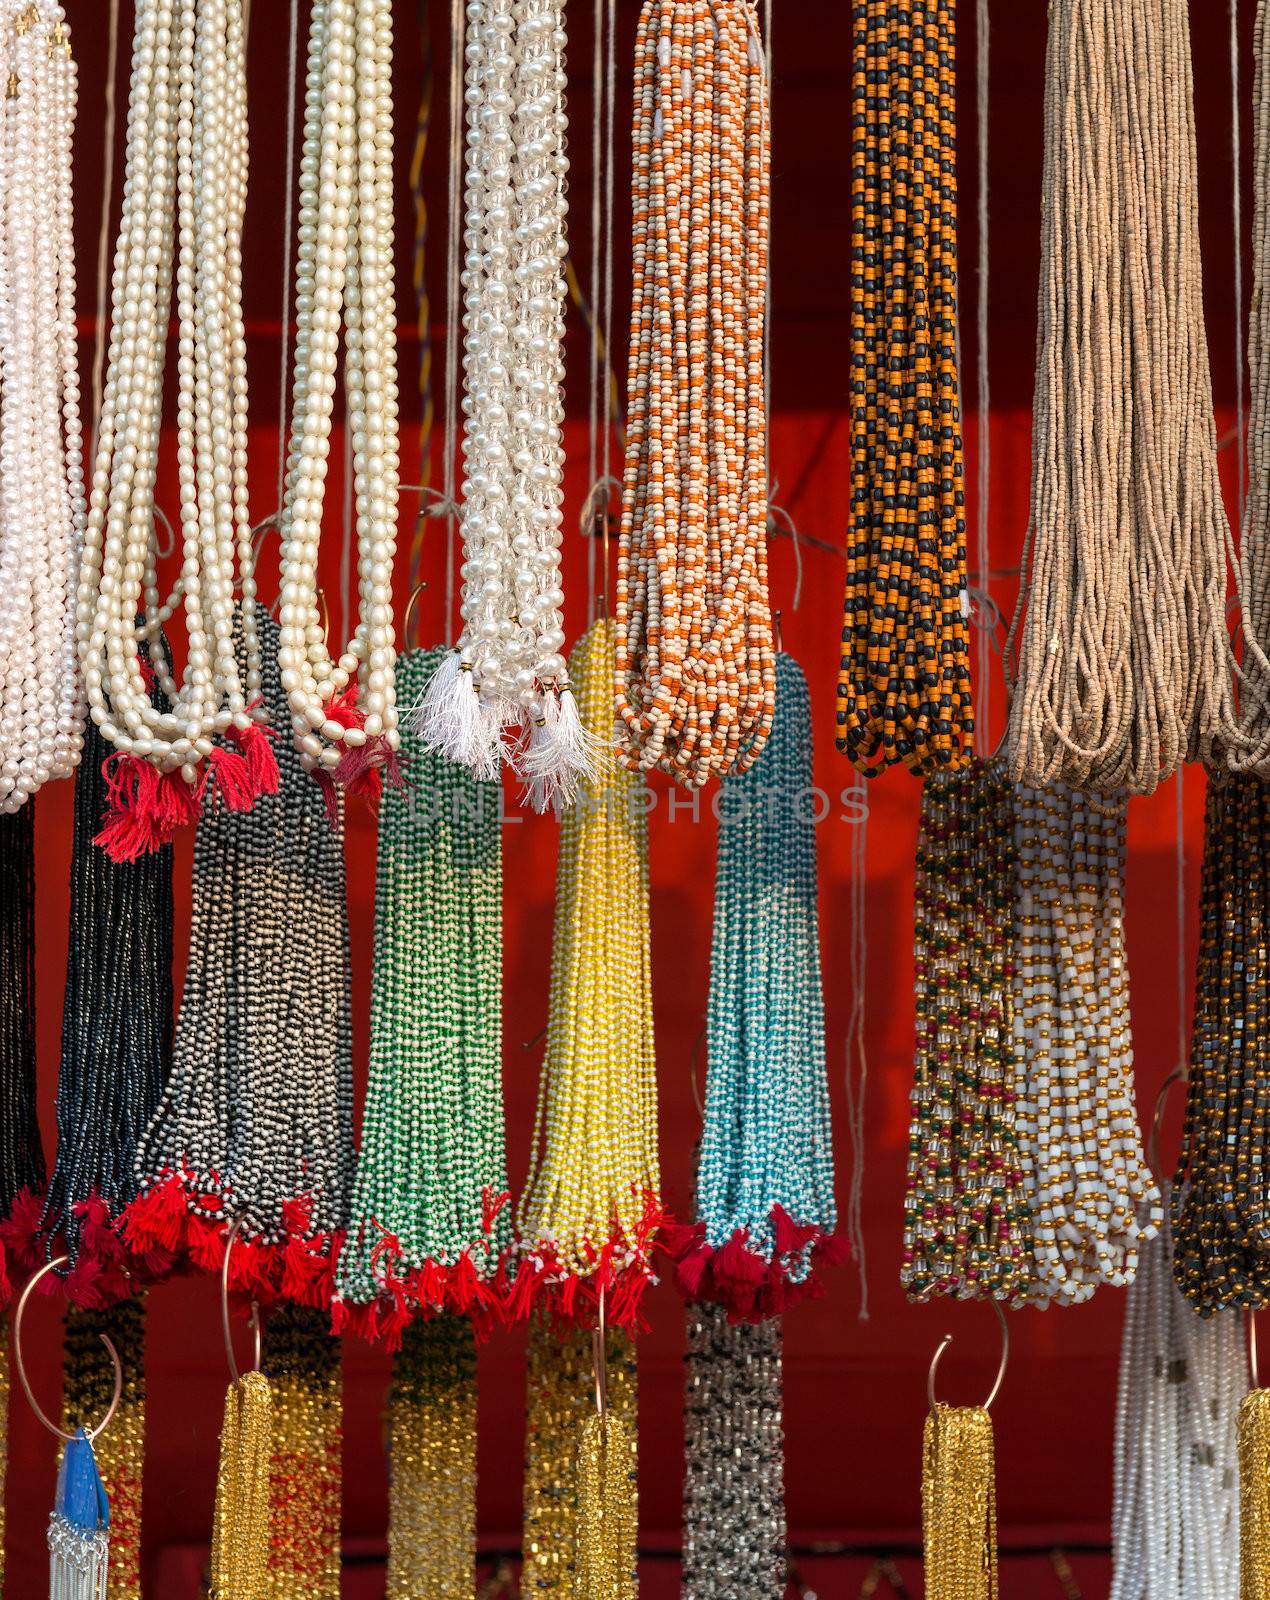 Strands of small colorful beads at the outdoor craft market in India